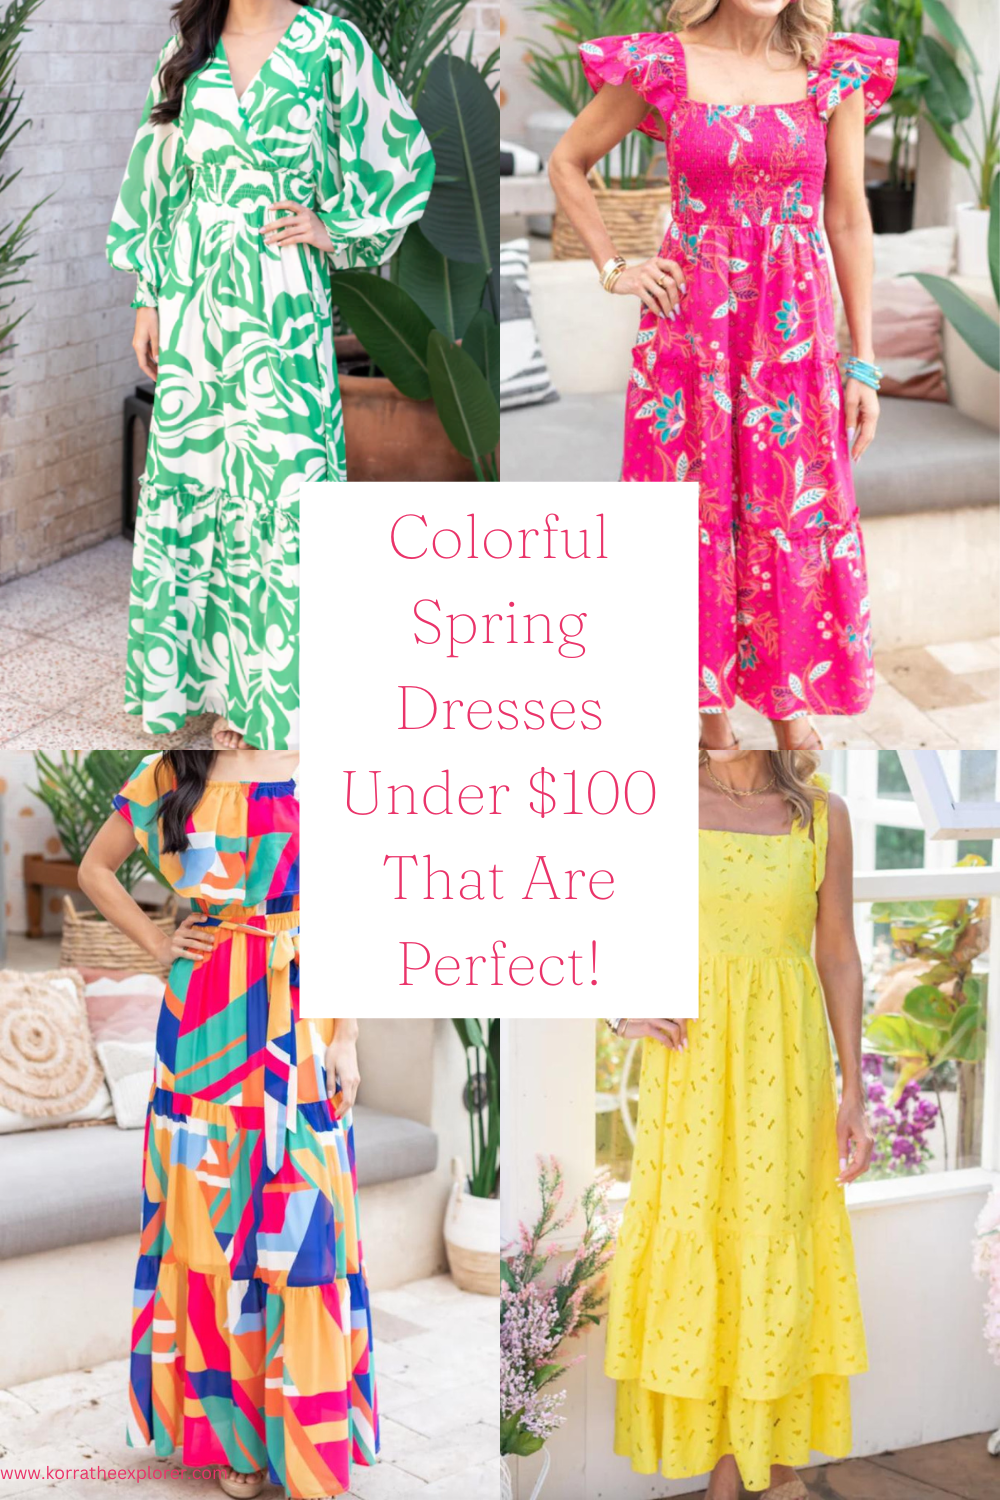 Colorful Spring Dresses Under $100 That Are Perfect!